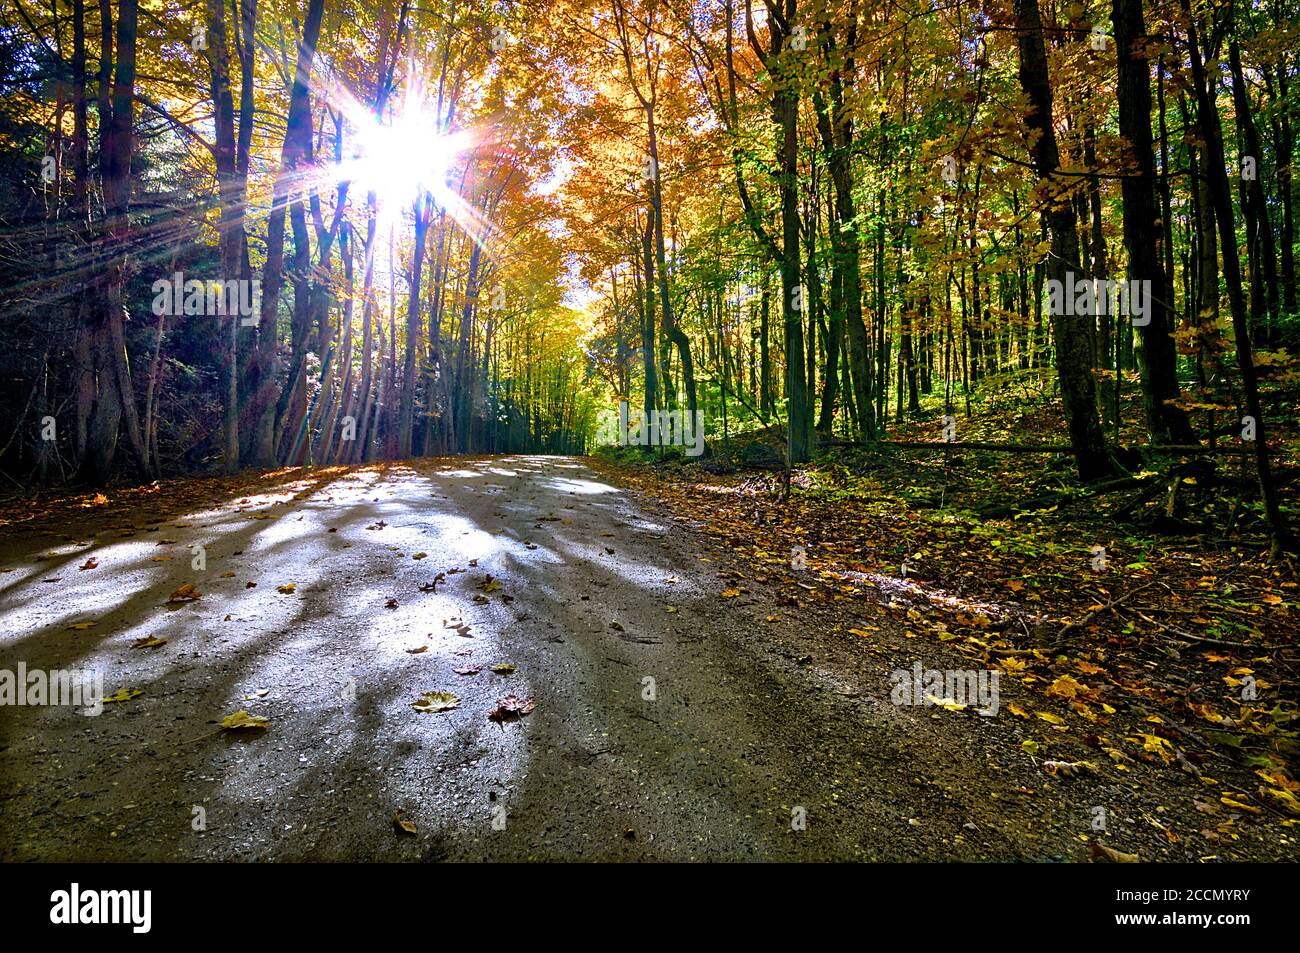 The landscape of country road with autumn leaf color, and low angle view. Stock Photo